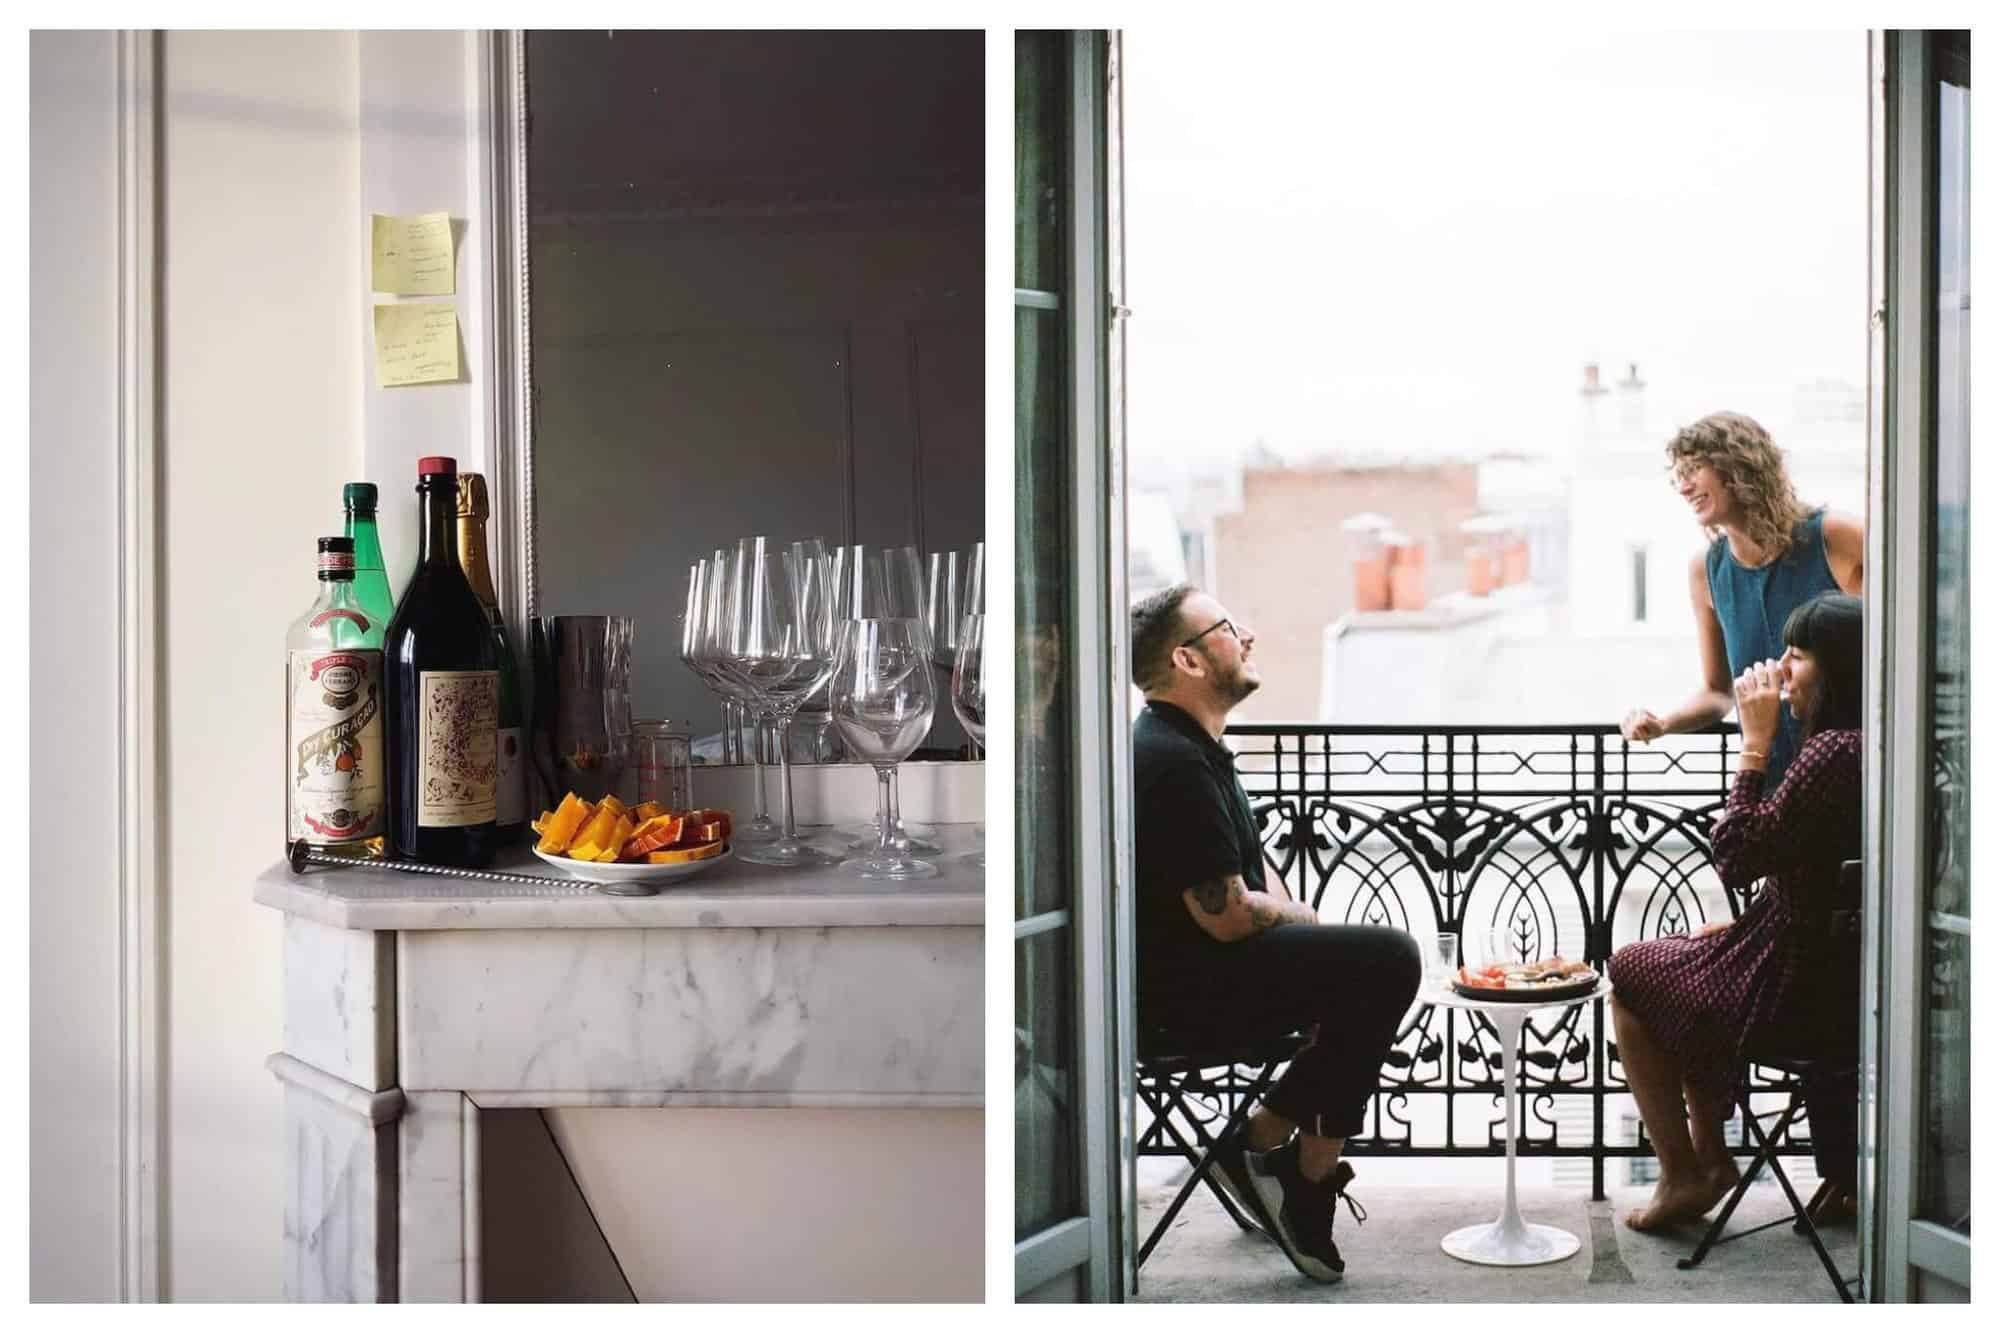 Left: a Parisian fireplace mantle with bottles of alcohol, citrus fruits, and several glasses. There is a mirror on the mantle. Right: A group of three people on a Parisian balcony. There is a table with plates of food and glasses and there is a man sitting on a chair to the left, there is one woman standing to the right, and another woman sitting in a chair and drinking.